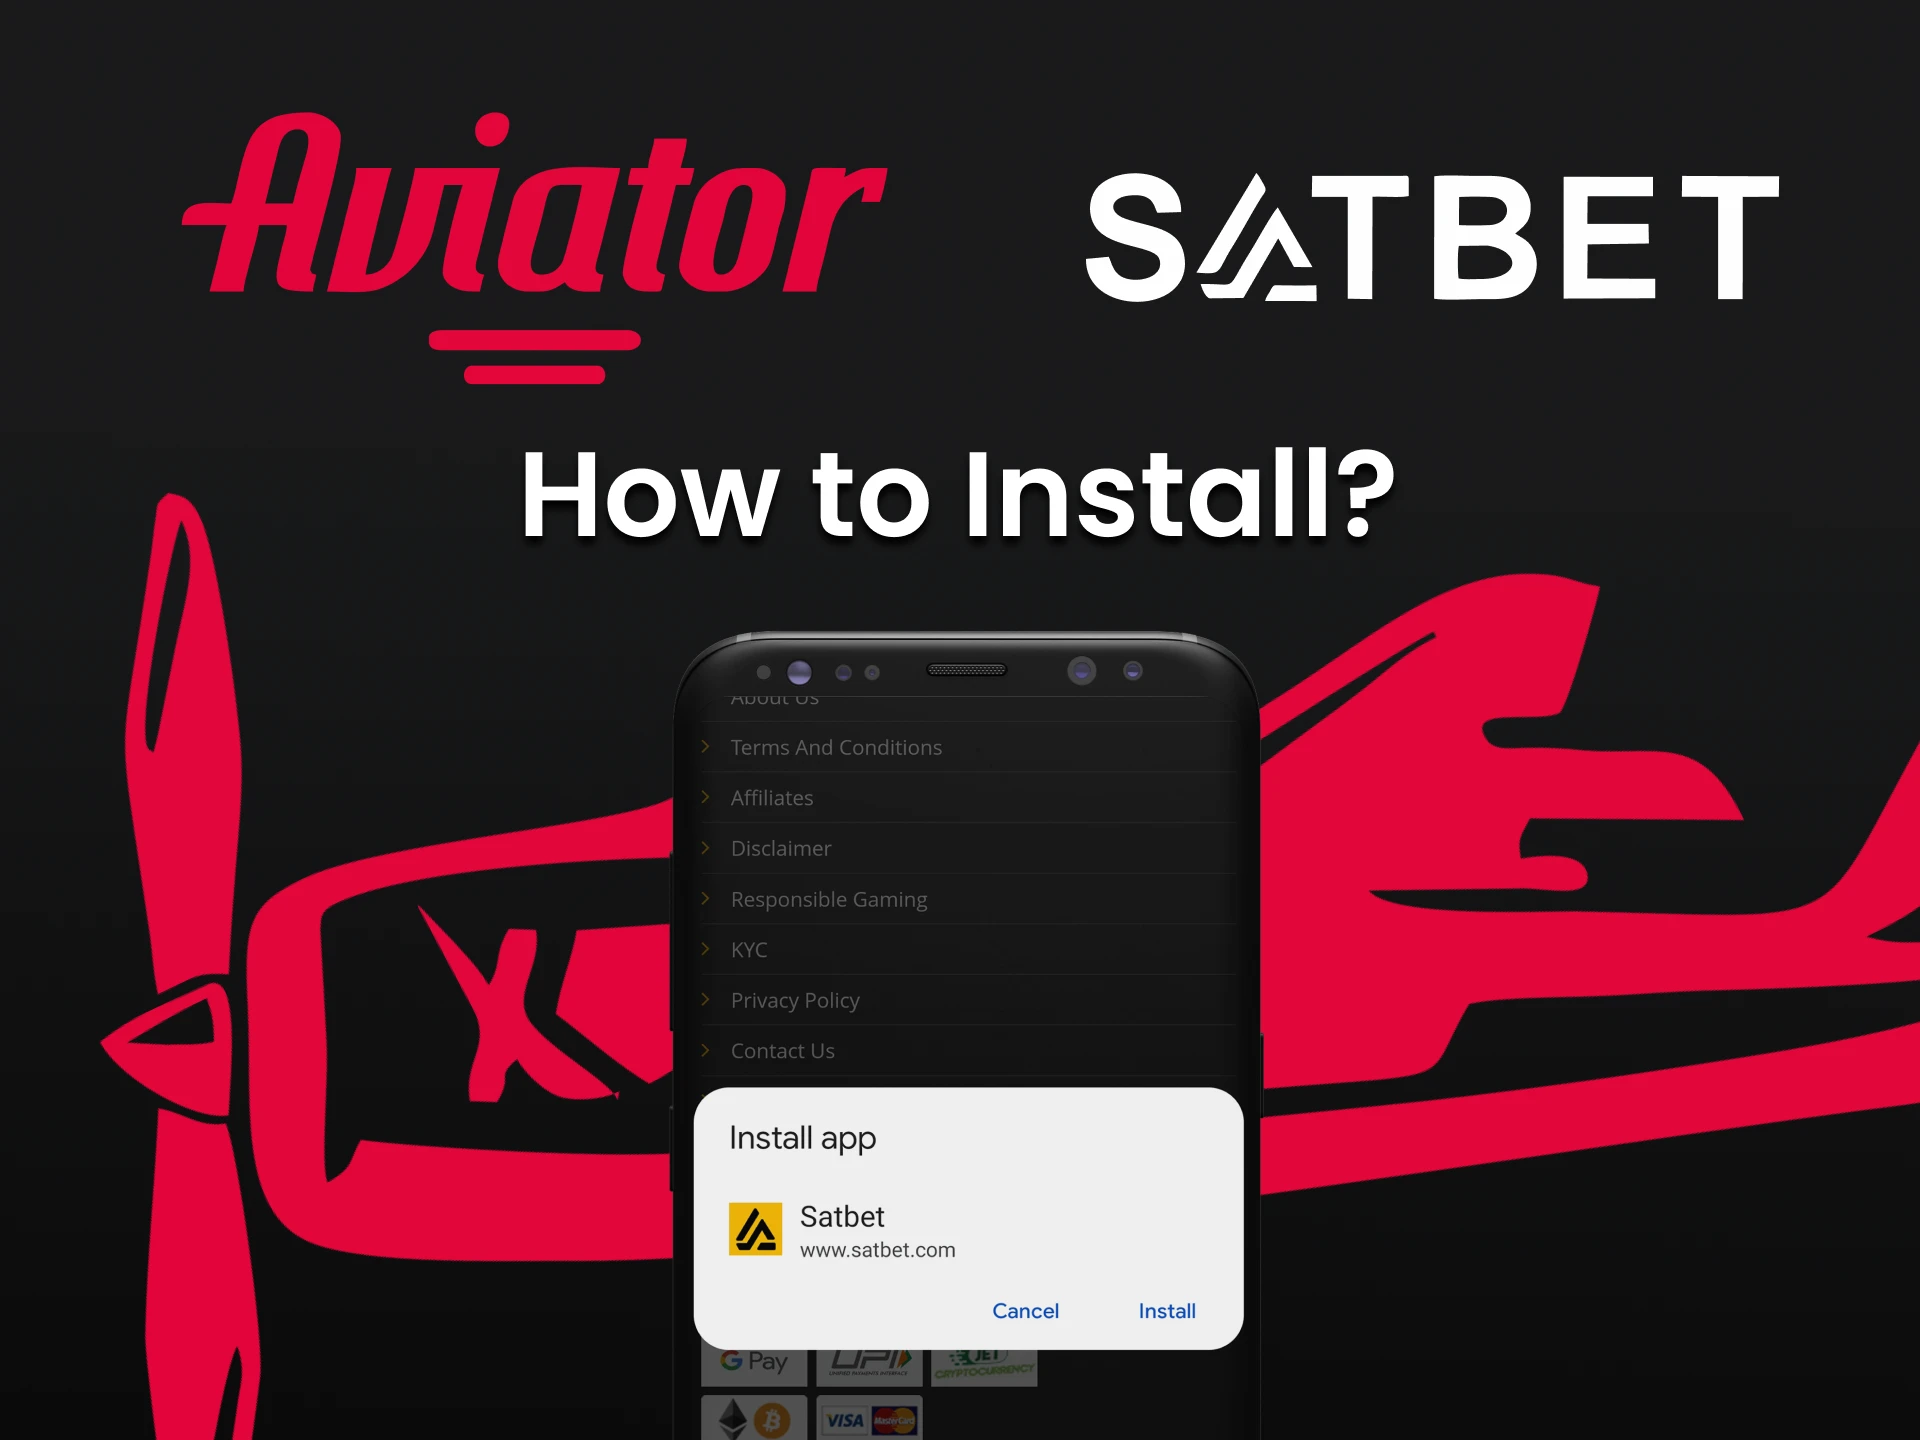 Learn how to install the Satbet app to play Aviator.